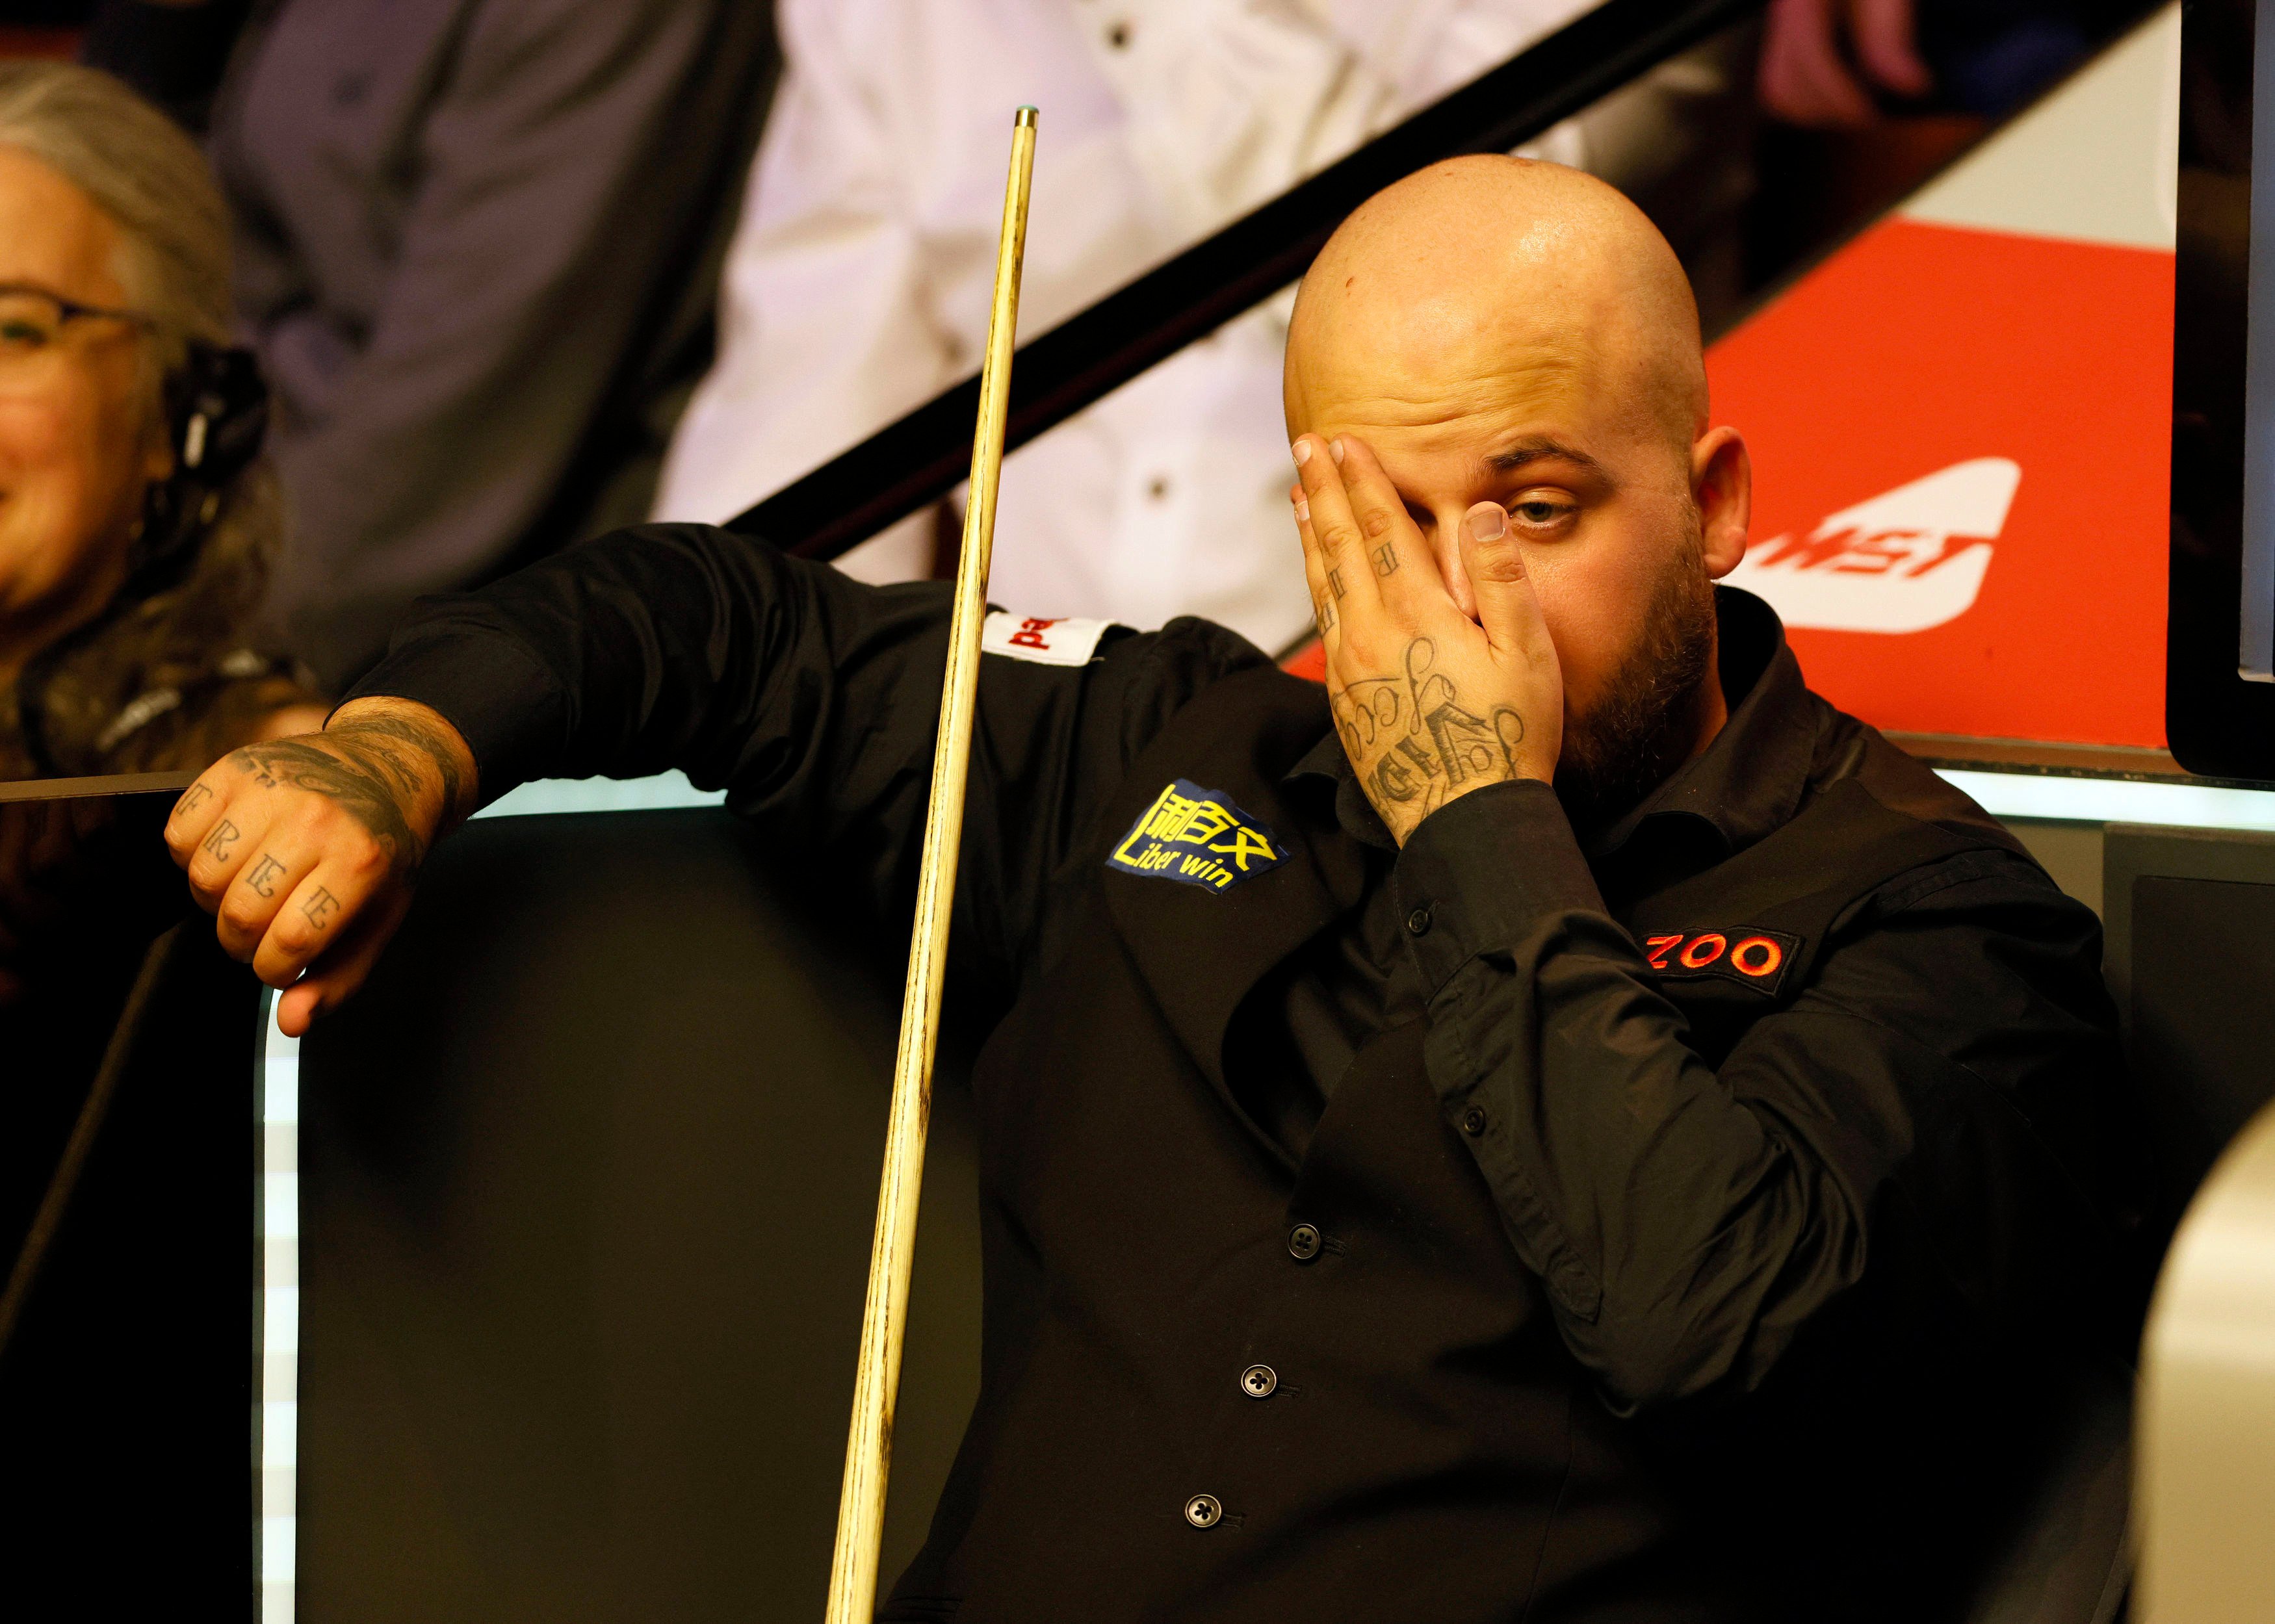 Luca Brecel during his match against David Gilbert on day one of the World Snooker Championship at the Crucible Theatre, Sheffield. Photo: AP